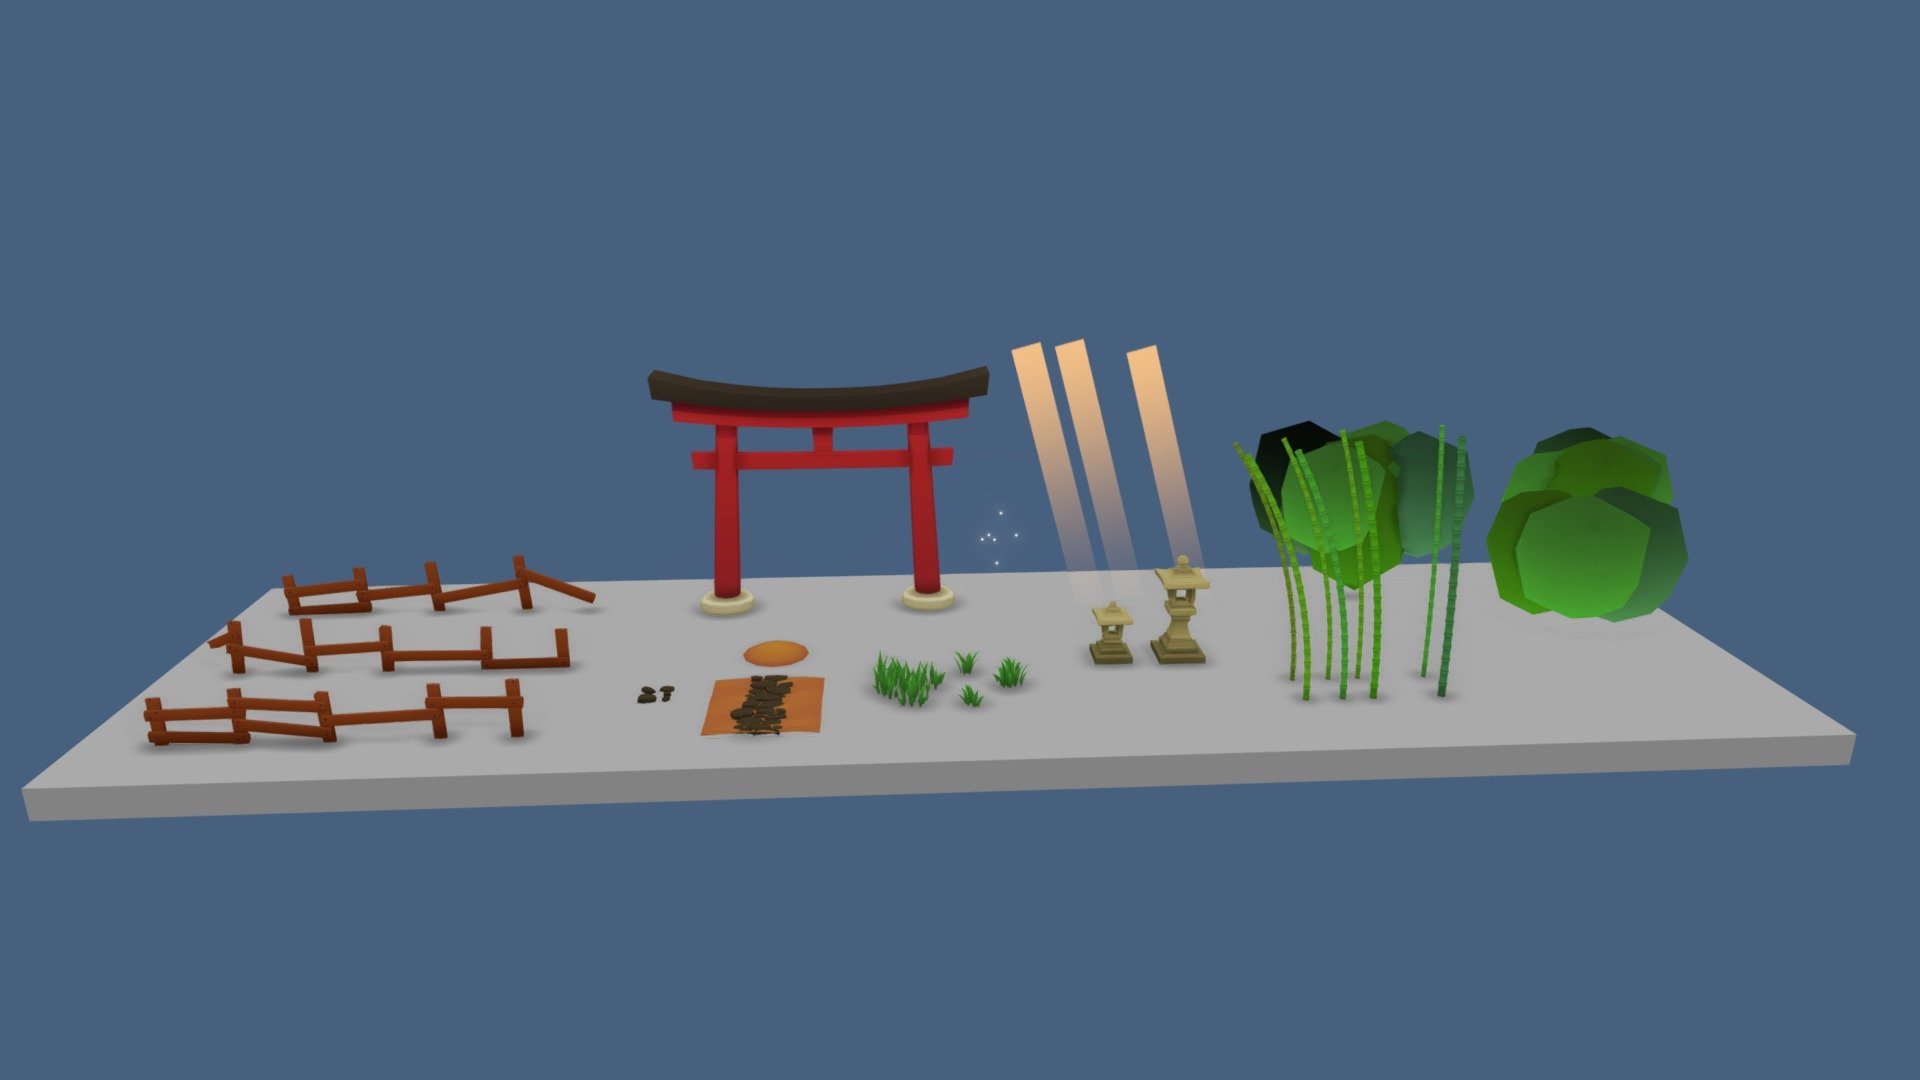 That the pieces I modeled to compose the environment of this looped animation. https://www.behance.net/gallery/134393961/Bamboo-Forest-Loop?

the slice of forest that repeat in loop are here https://sketchfab.com/3d-models/bamboo-forest-20d9ce9e8d6345bbbe10a450bda0b9ae - Bamboo Forest pieces - 3D model by Victor Estivador (@VictorEstivador) 3d model